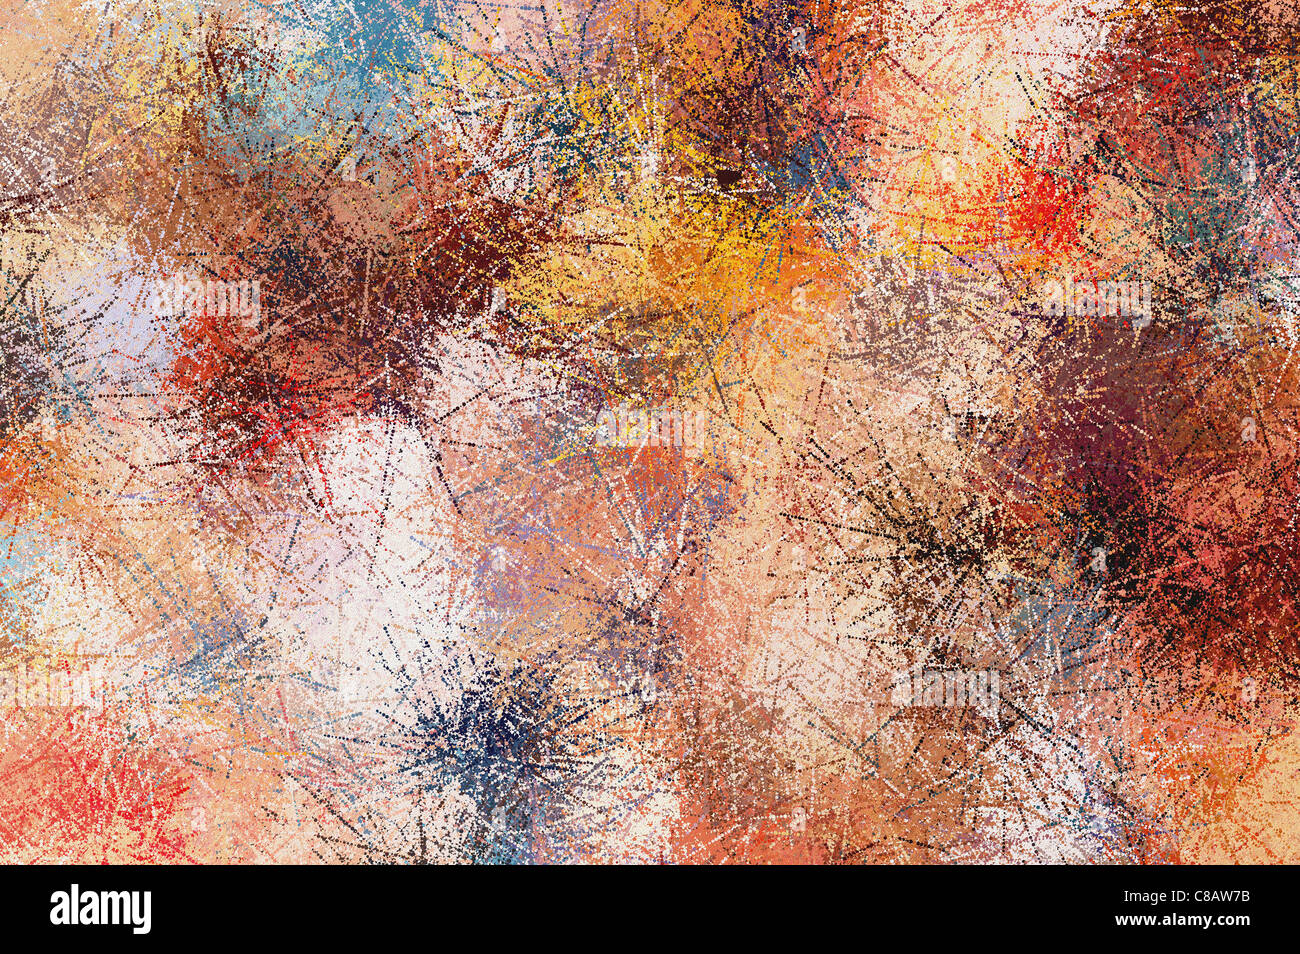 Abstract background painting of colorful splatters of dots Stock Photo